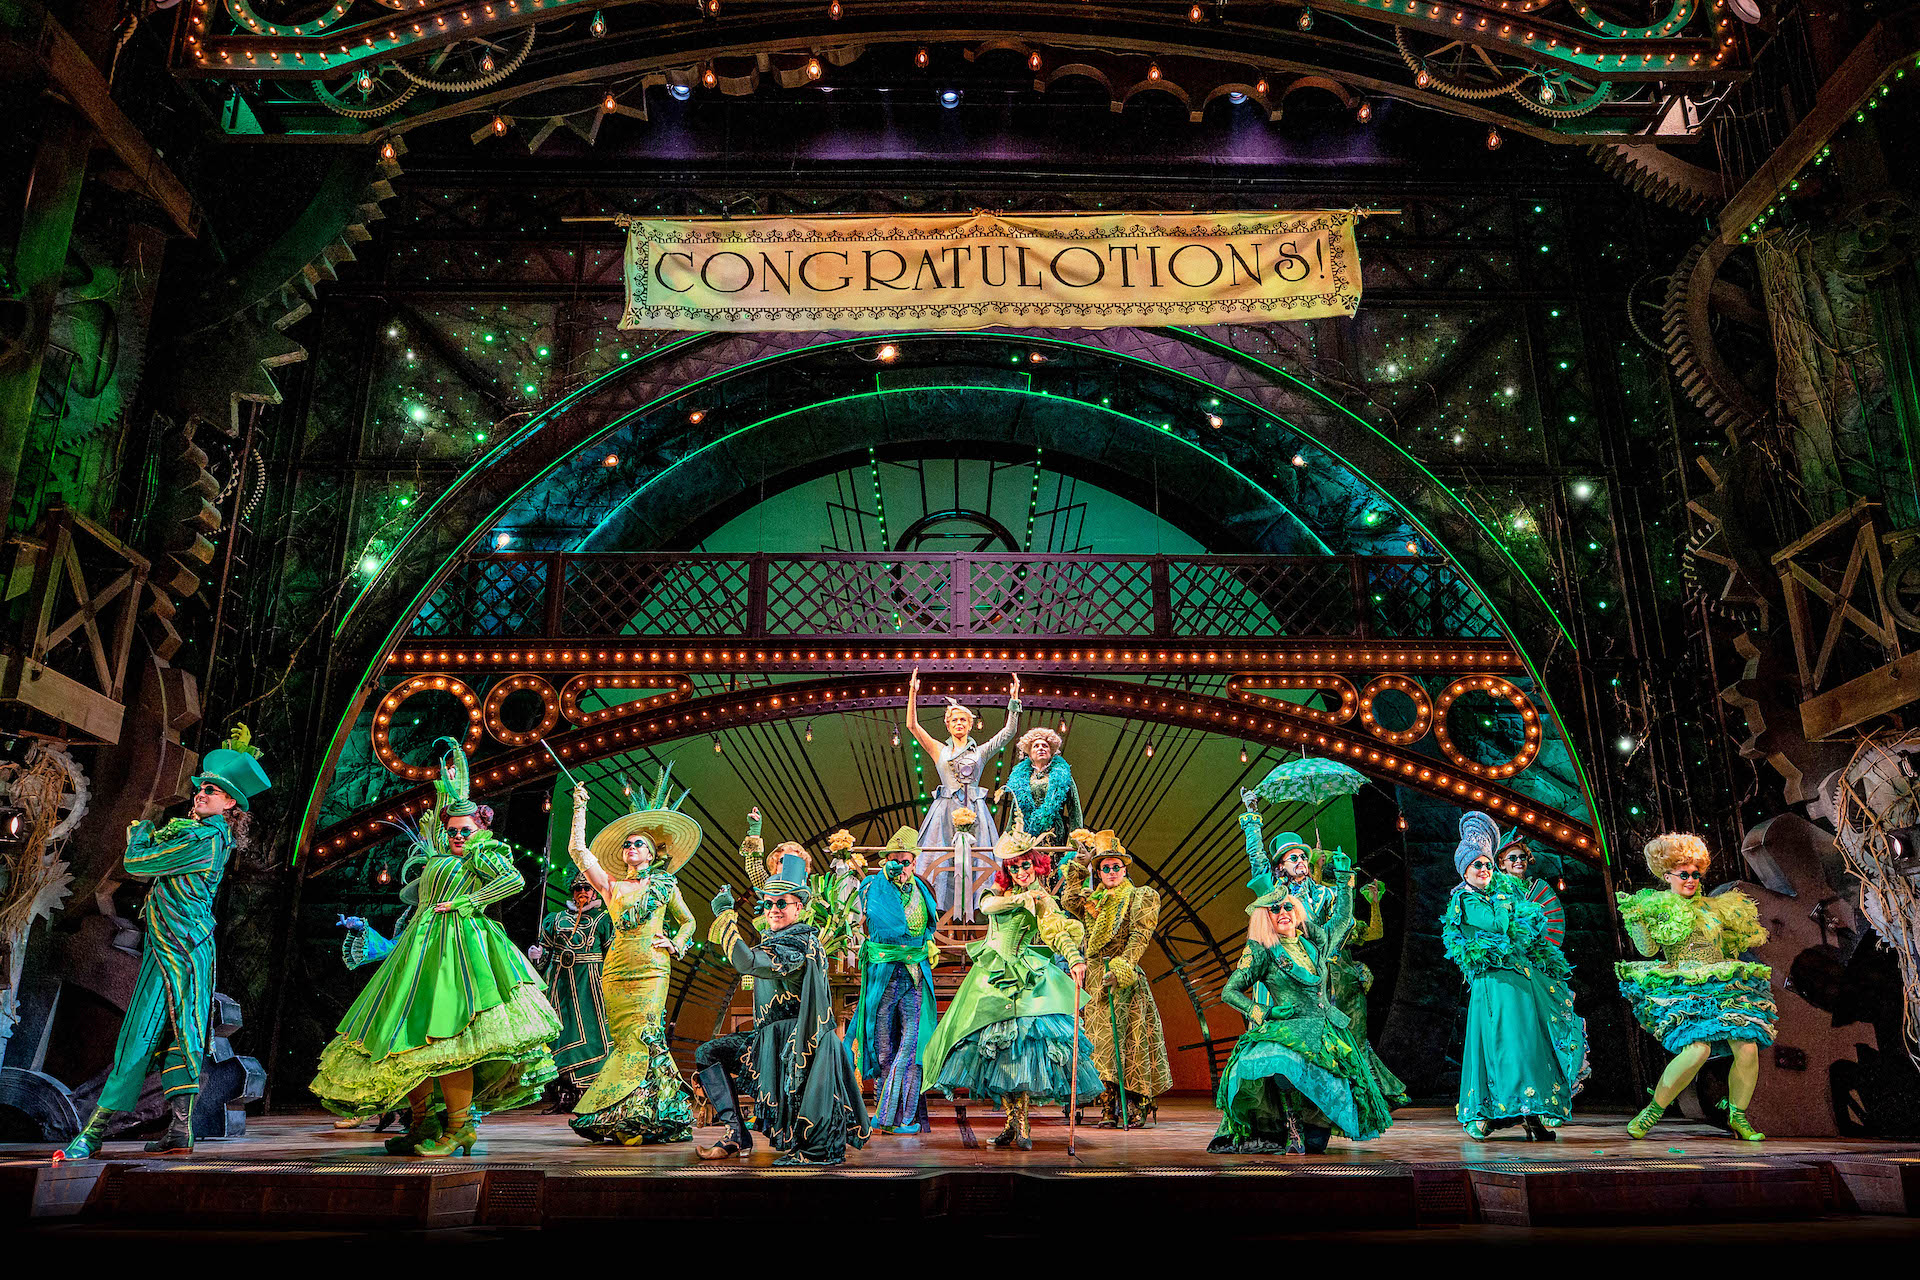 Wicked London production image showing The Emerald City Ozians listening to Glinda's speech with a banner that says "Congratulotions"